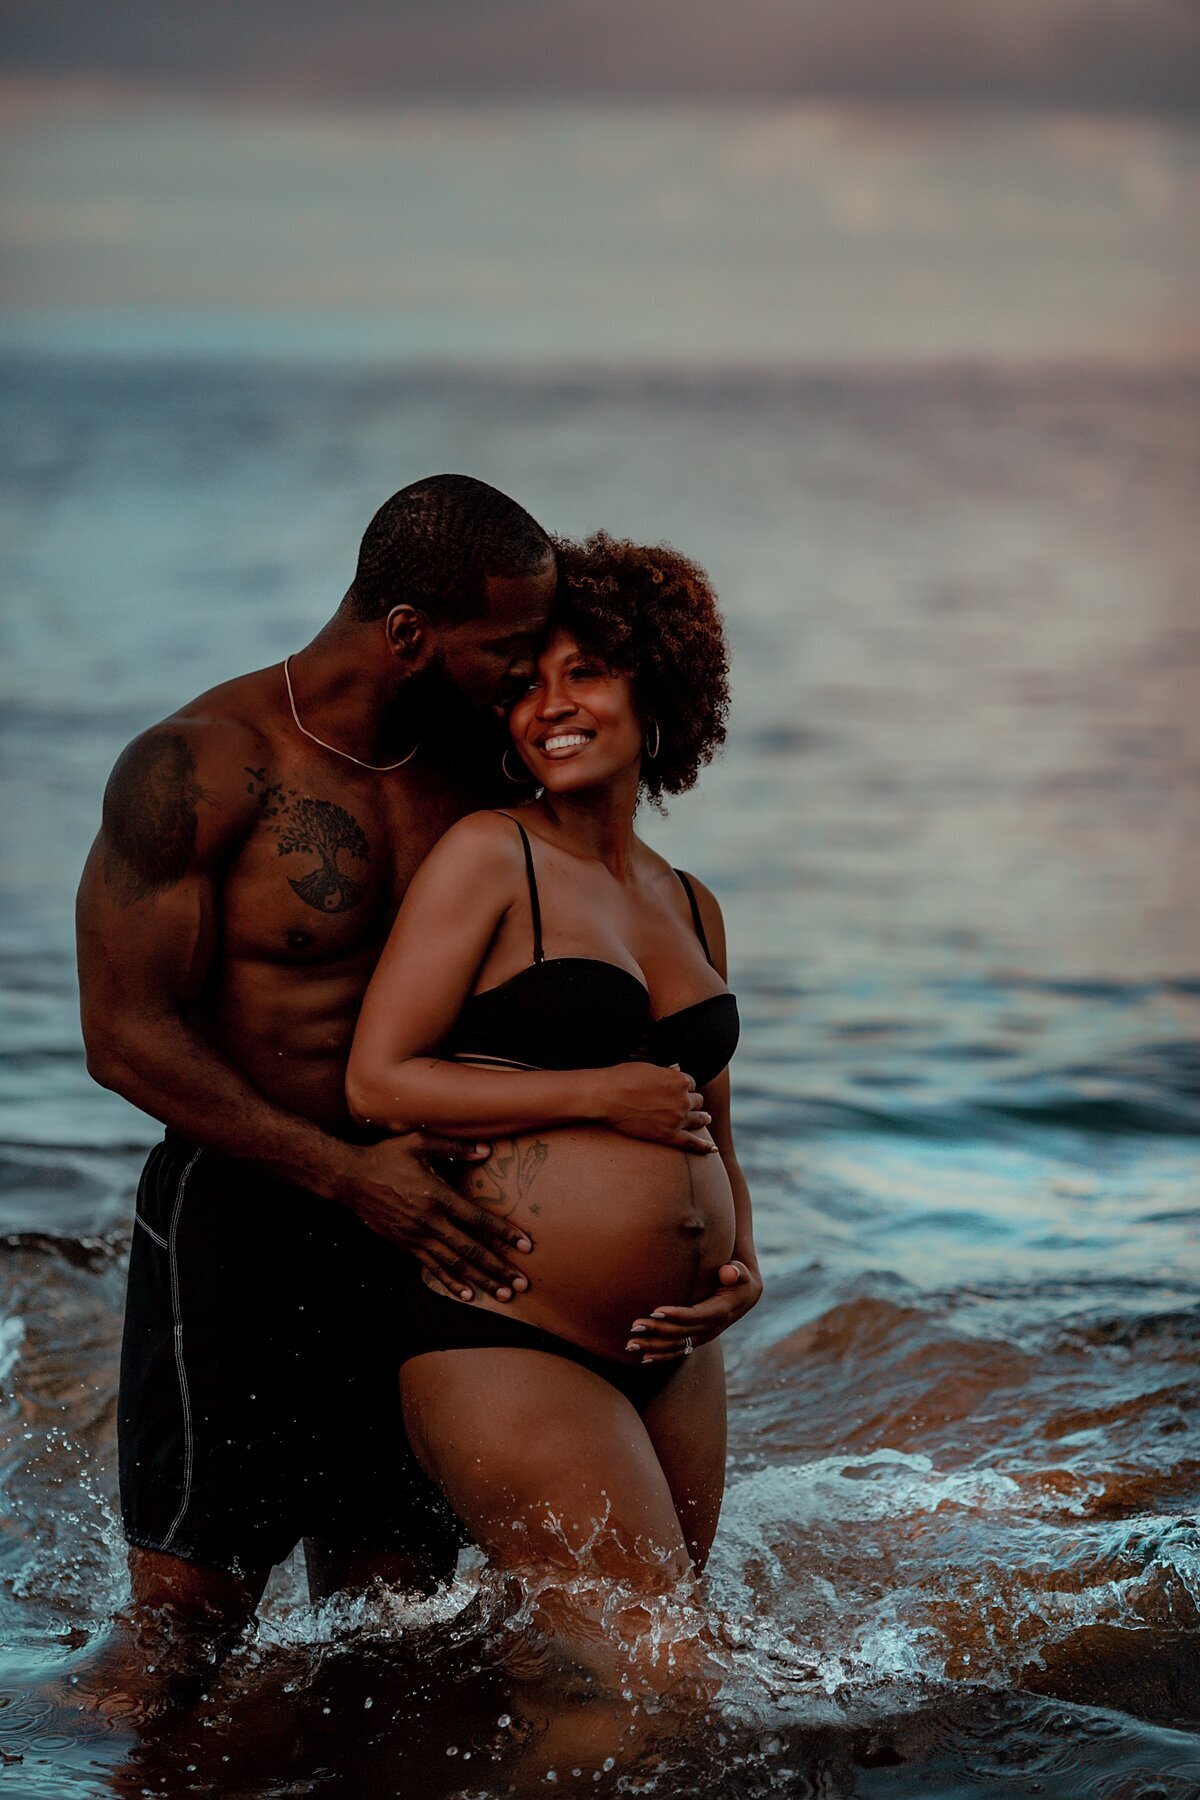 Couple embracing in the ocean for their Maternity portraits with Love + Water